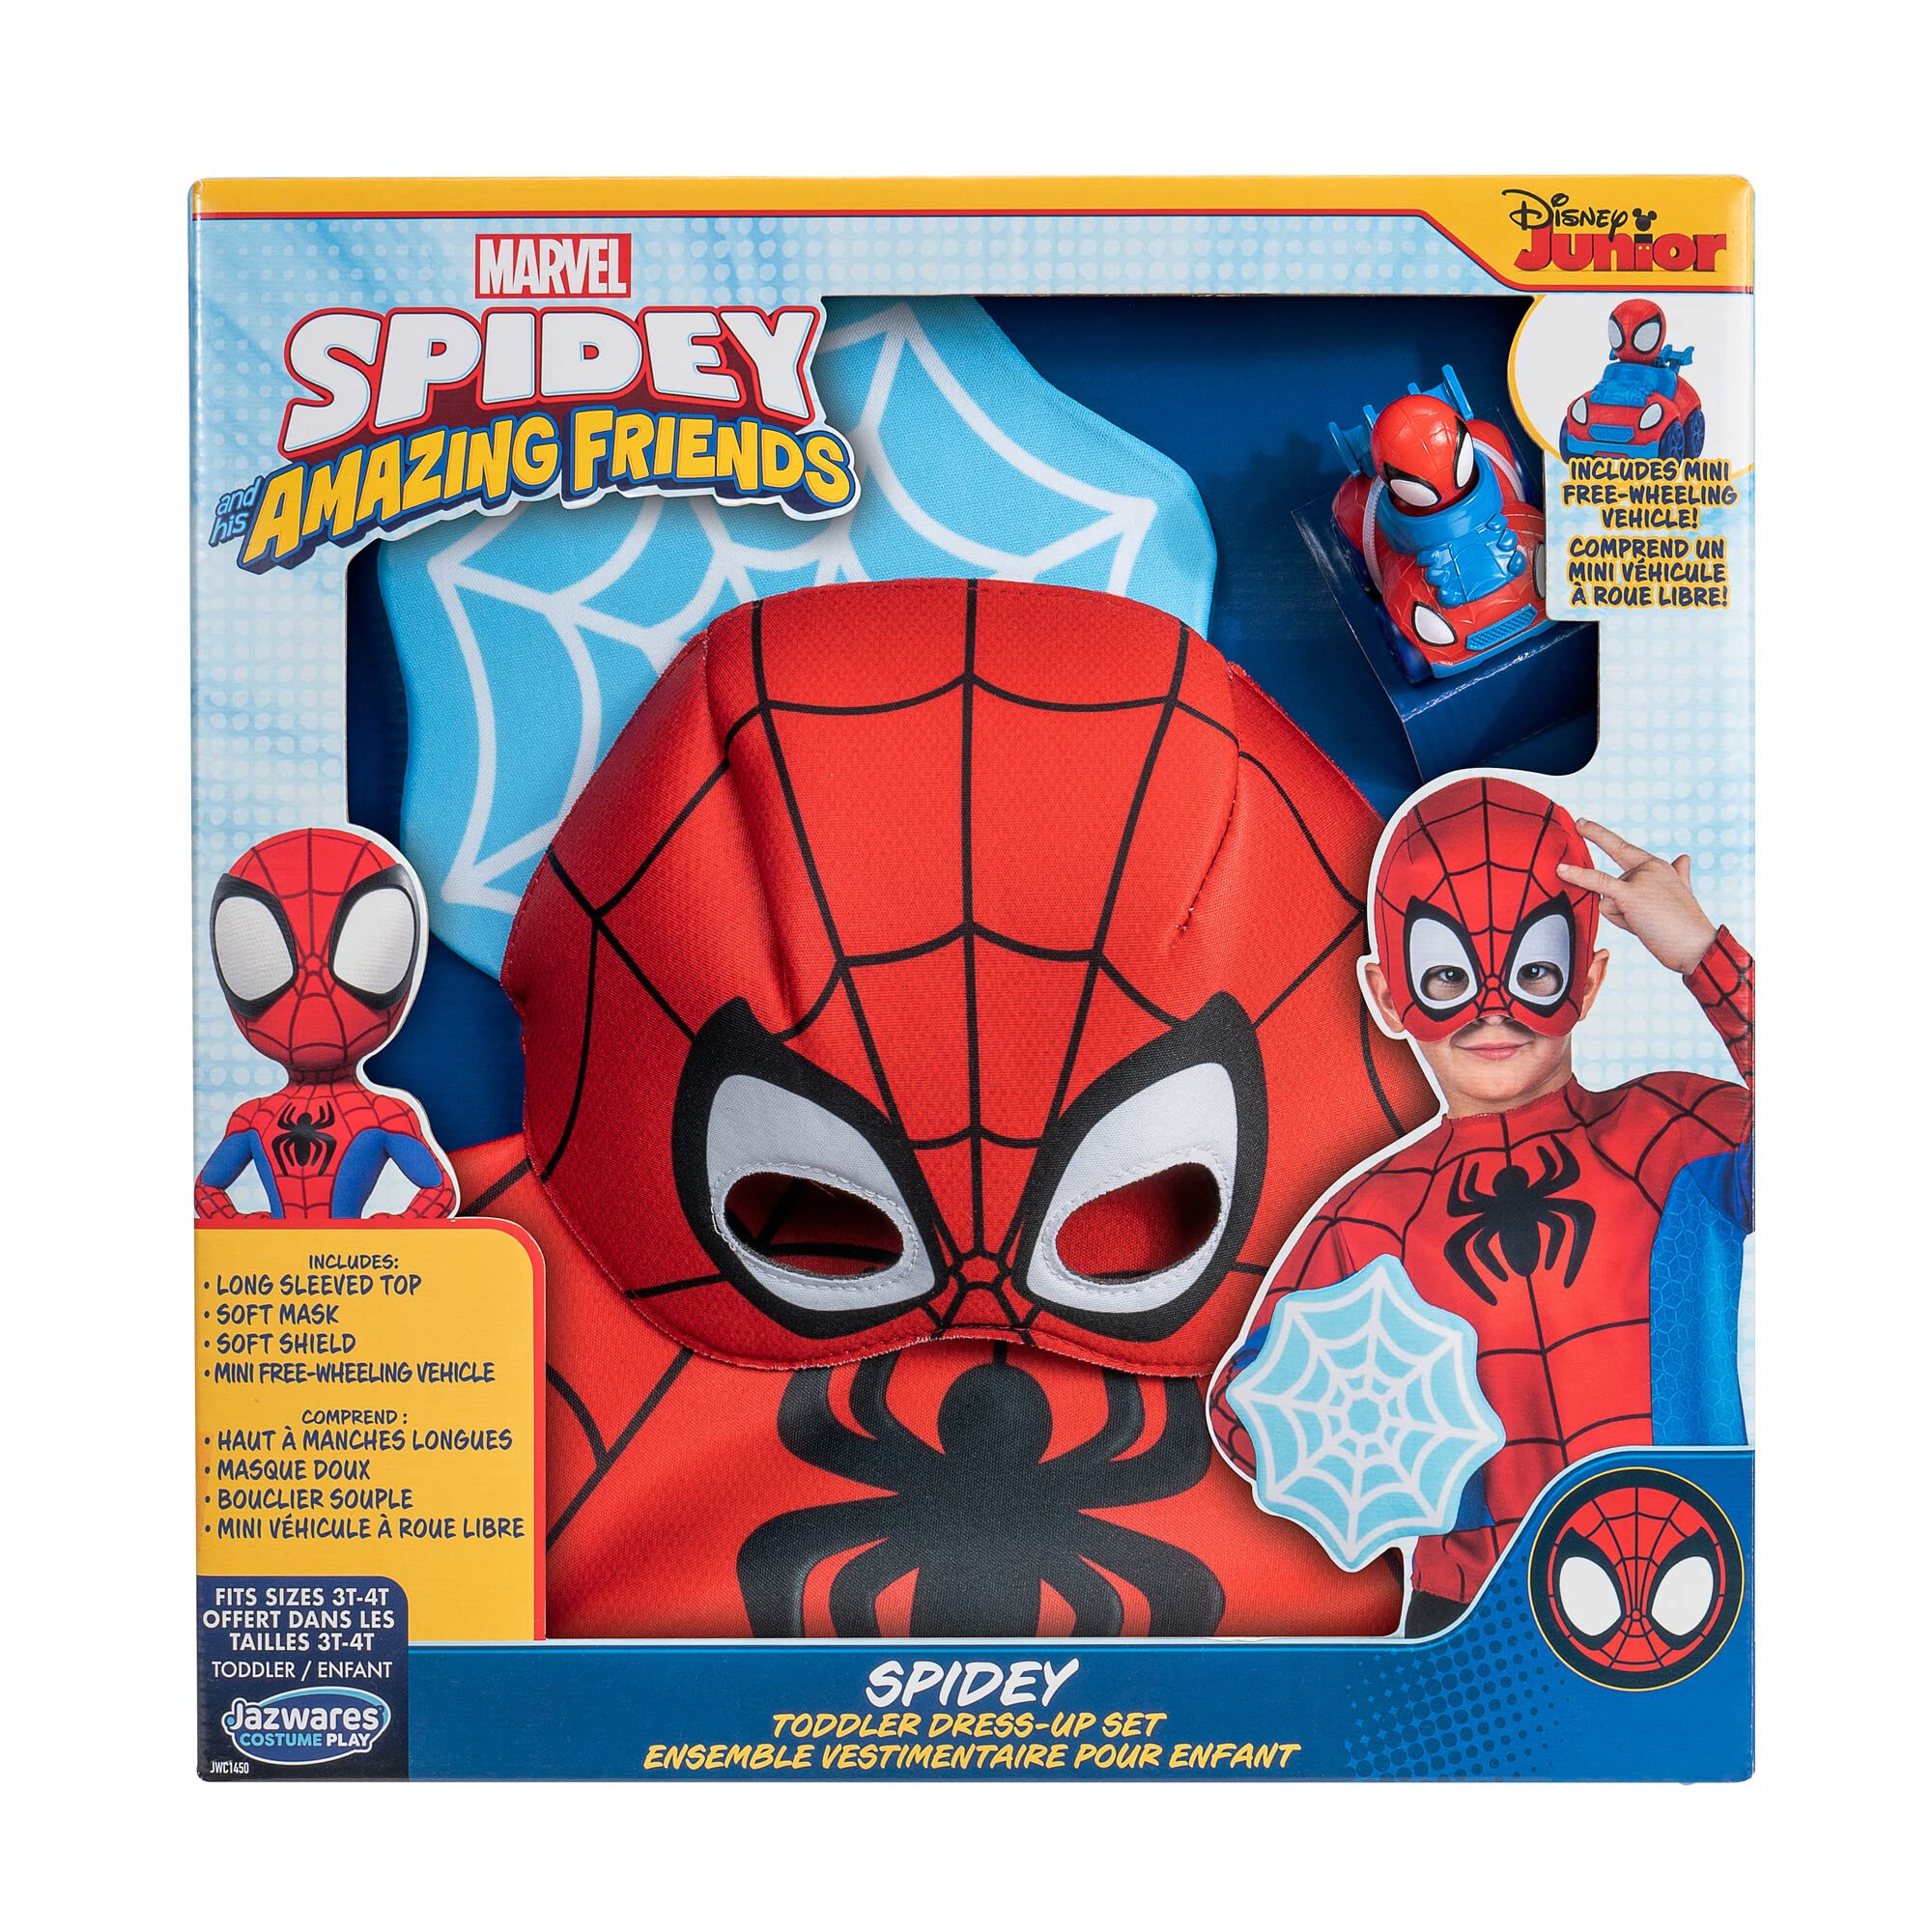 Marvel Official Toddler Dress-Up Box Set – Costume Top, Fabric Mask, Web Shield Accessory